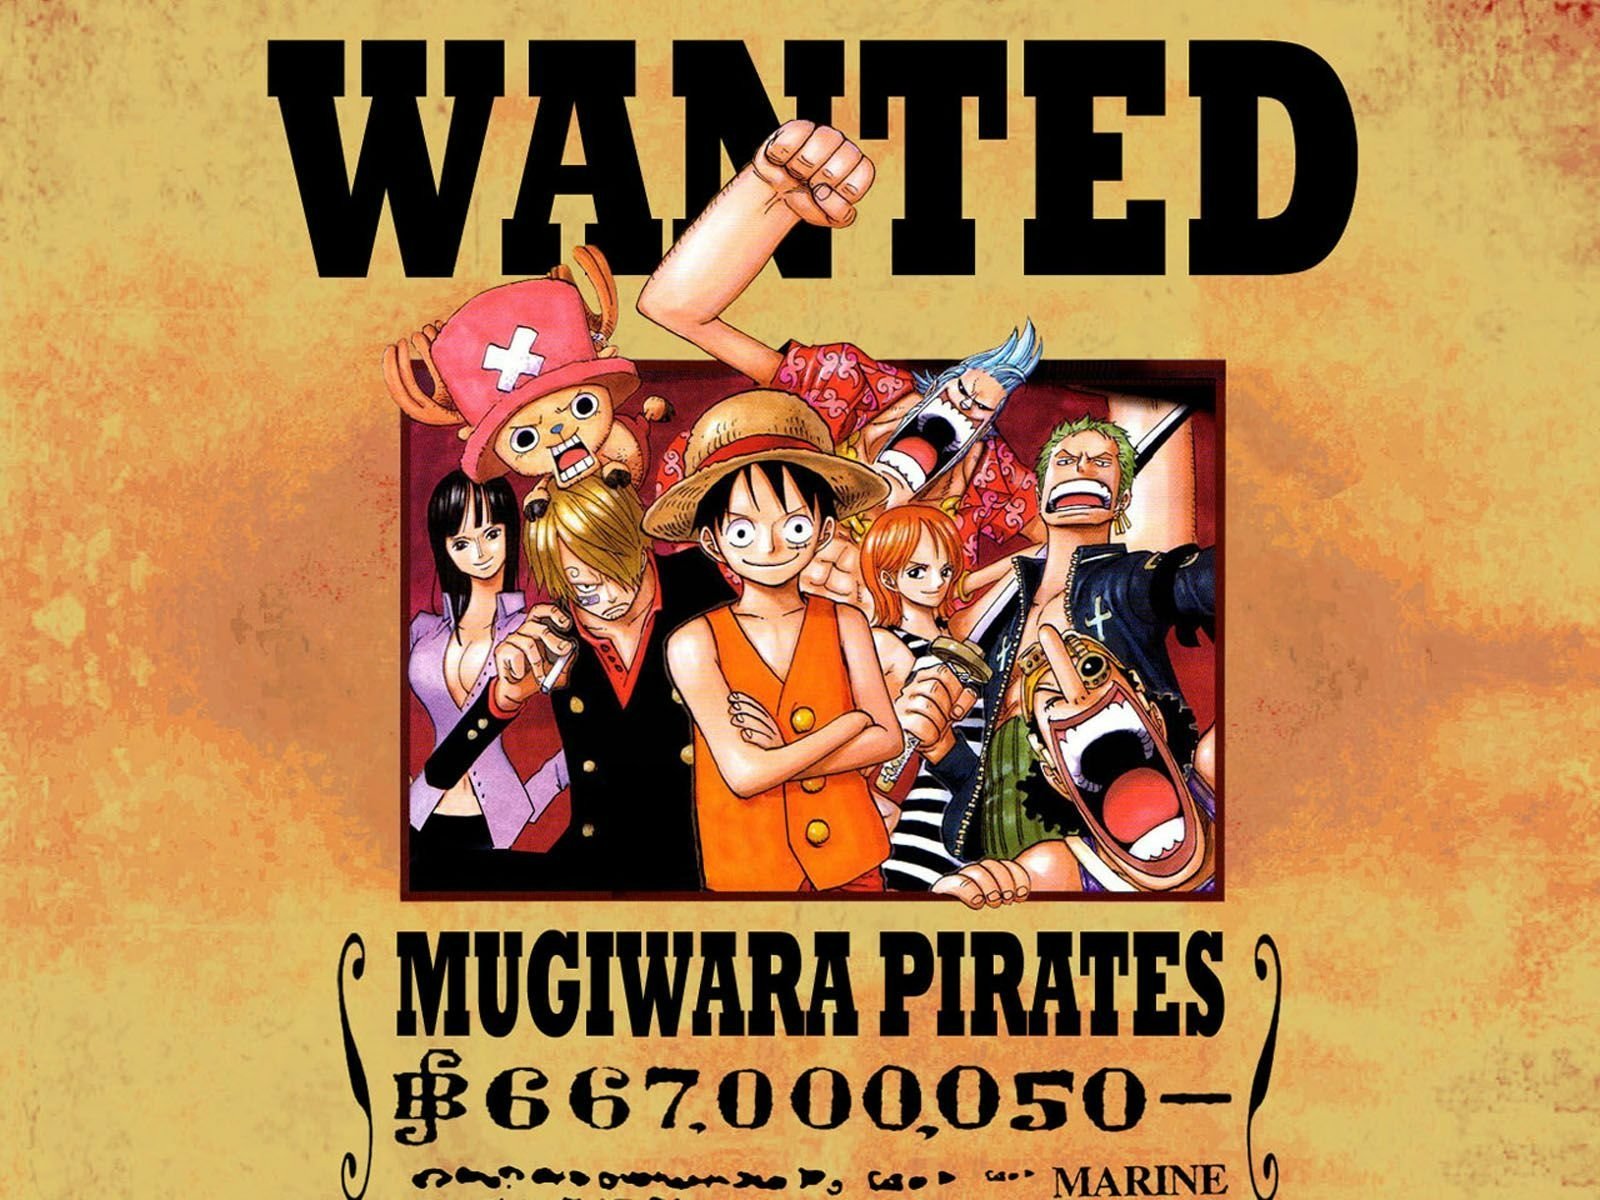 1600x1200 Wanted poster of the straw hats Wallpaper Background Image. 